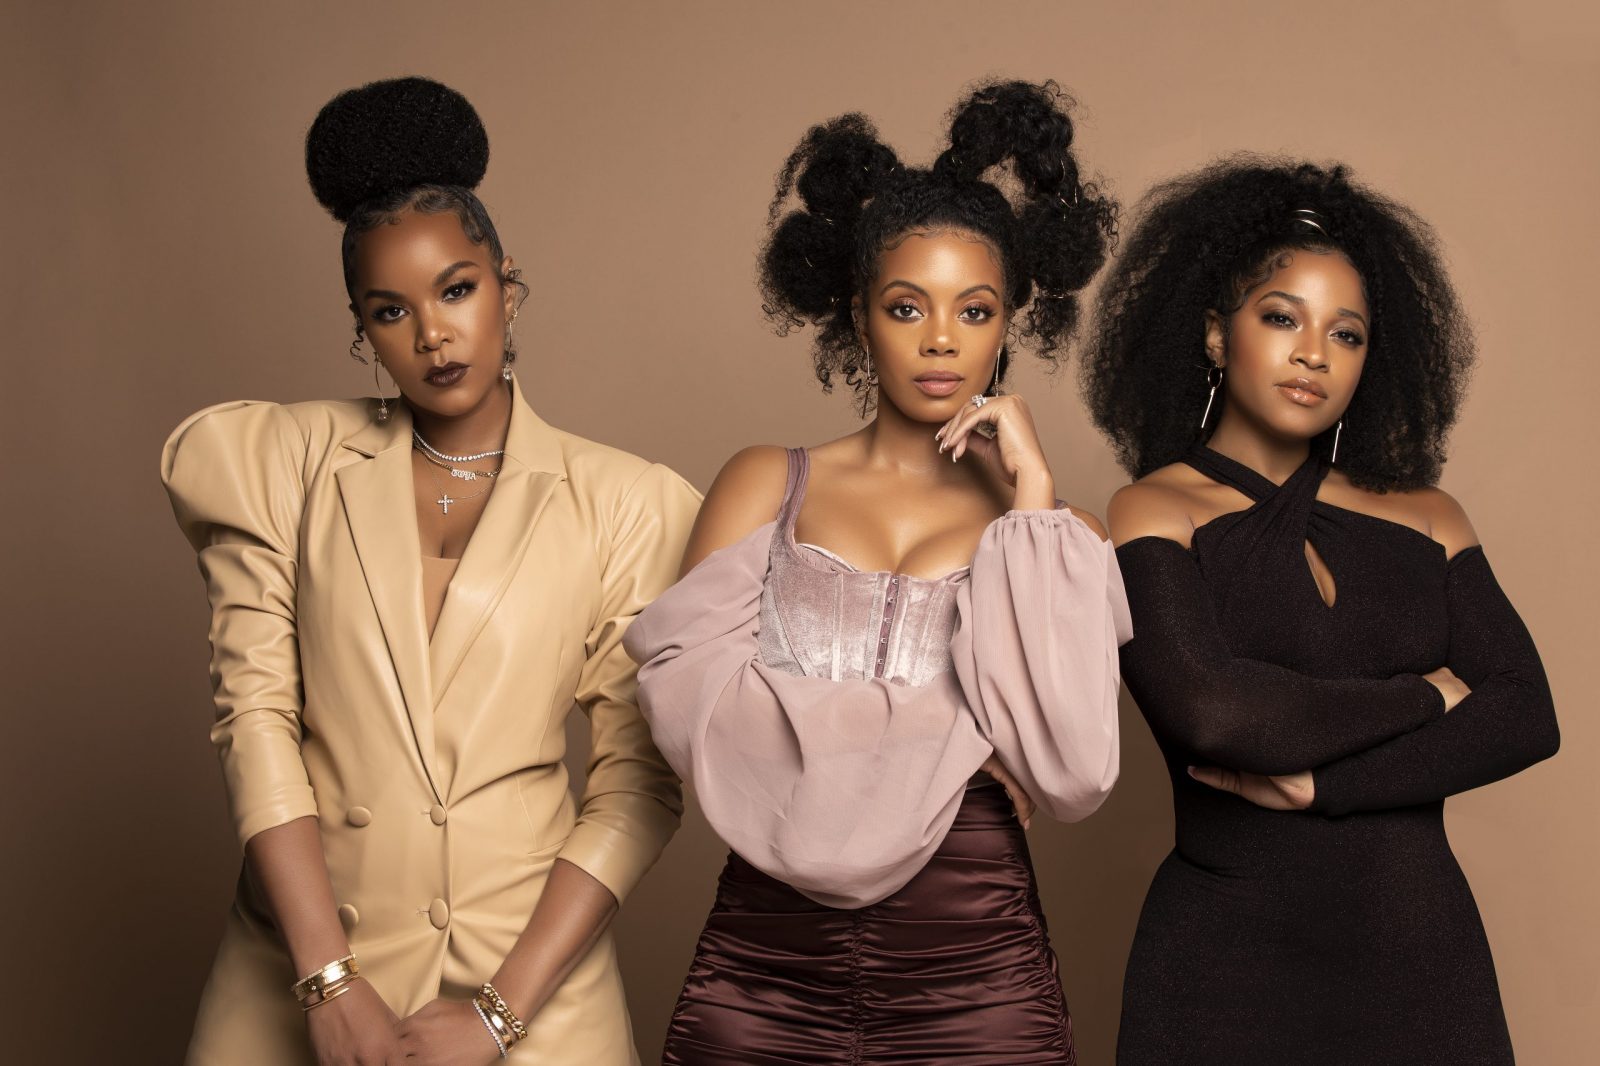 LeToya Luckett, Toya Johnson, and Monique Rodriguez Go Back to Their Roots